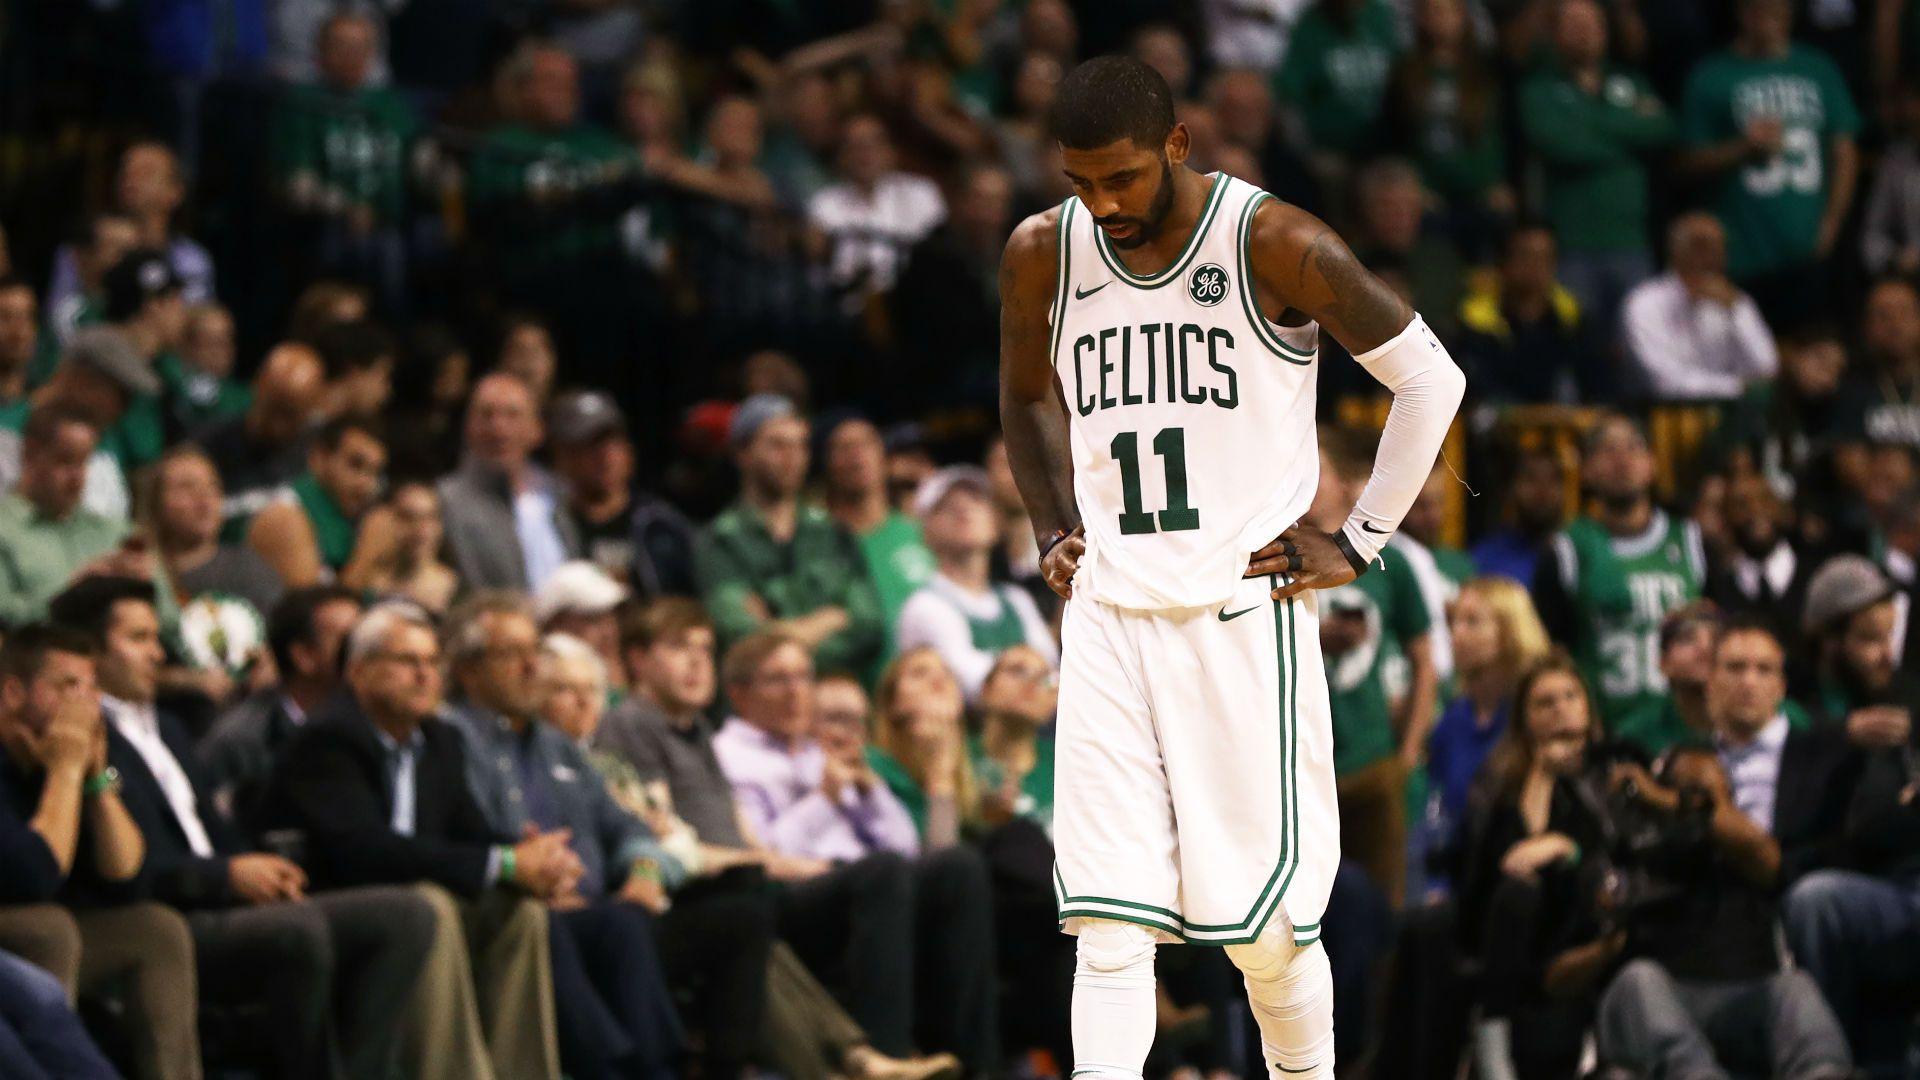 Kyrie Irving wants his own team, but No. 1 status comes with no